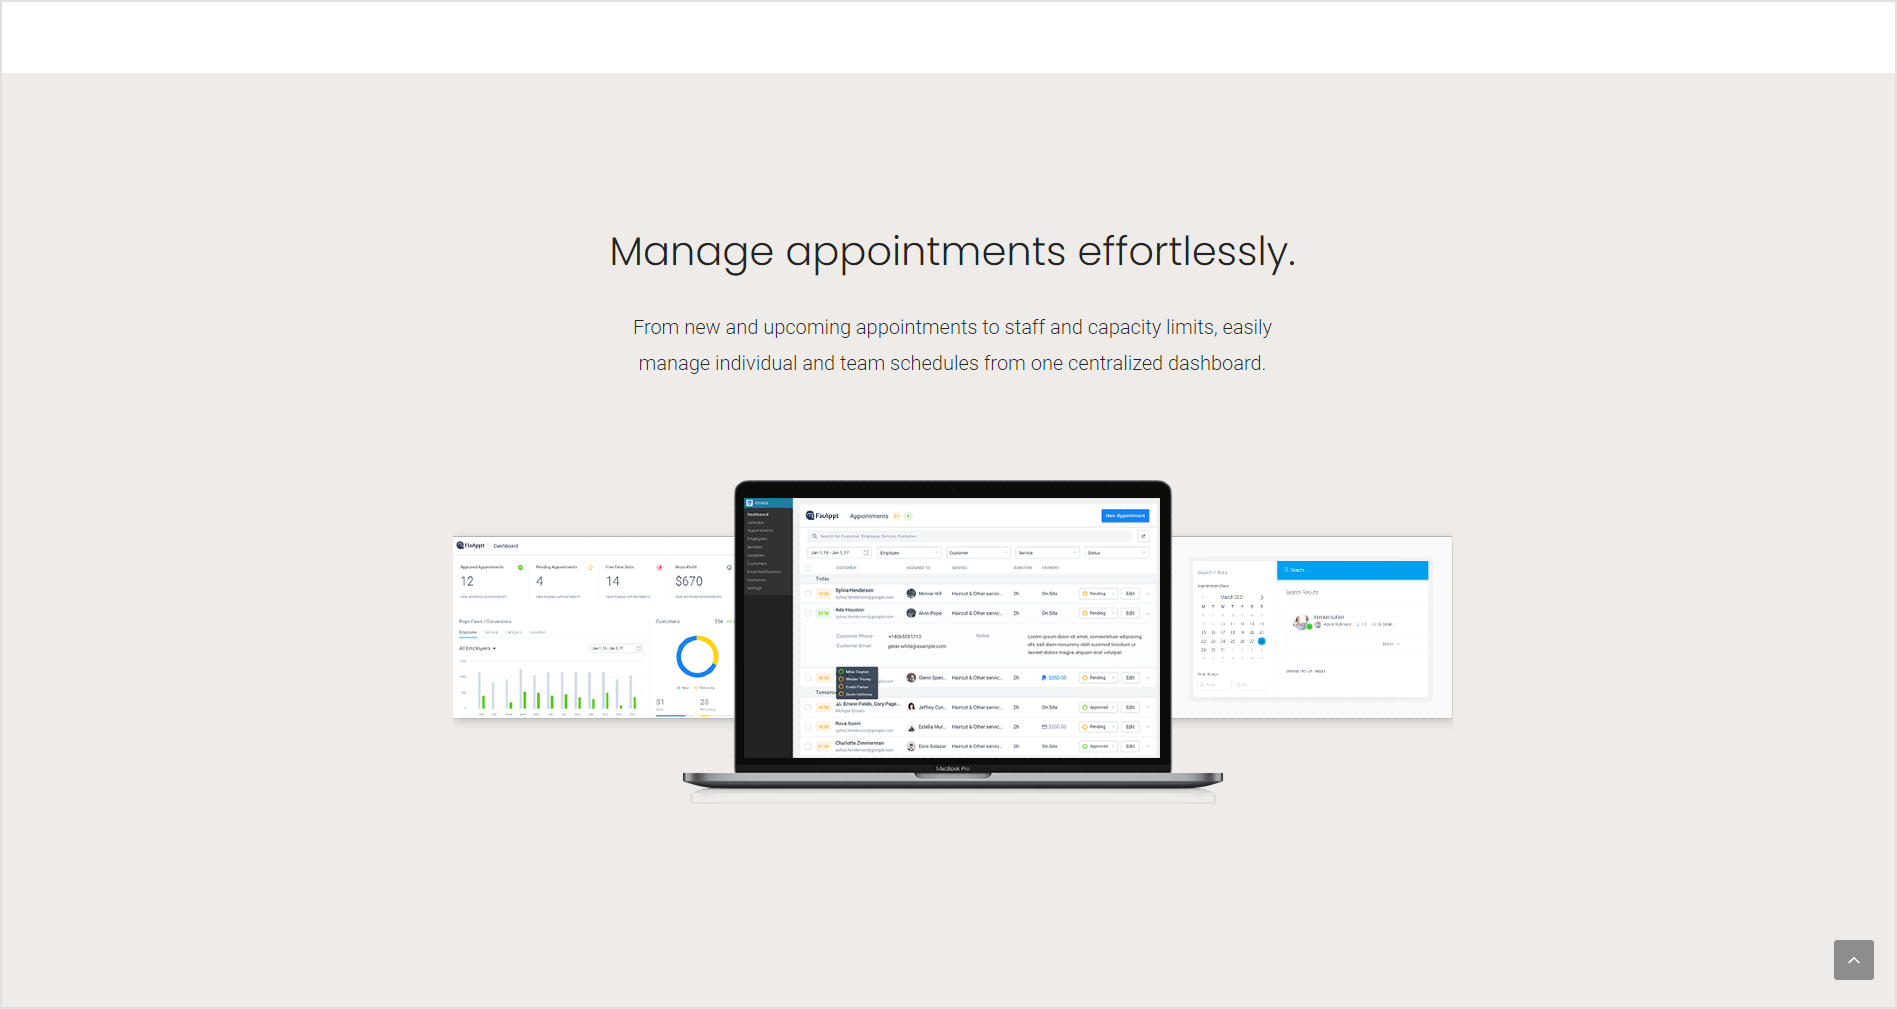 Manage appointments effortlessly. From new and upcoming appointments to staff and capacity limits, easily manage individual and team schedules from one centralized dashboard.